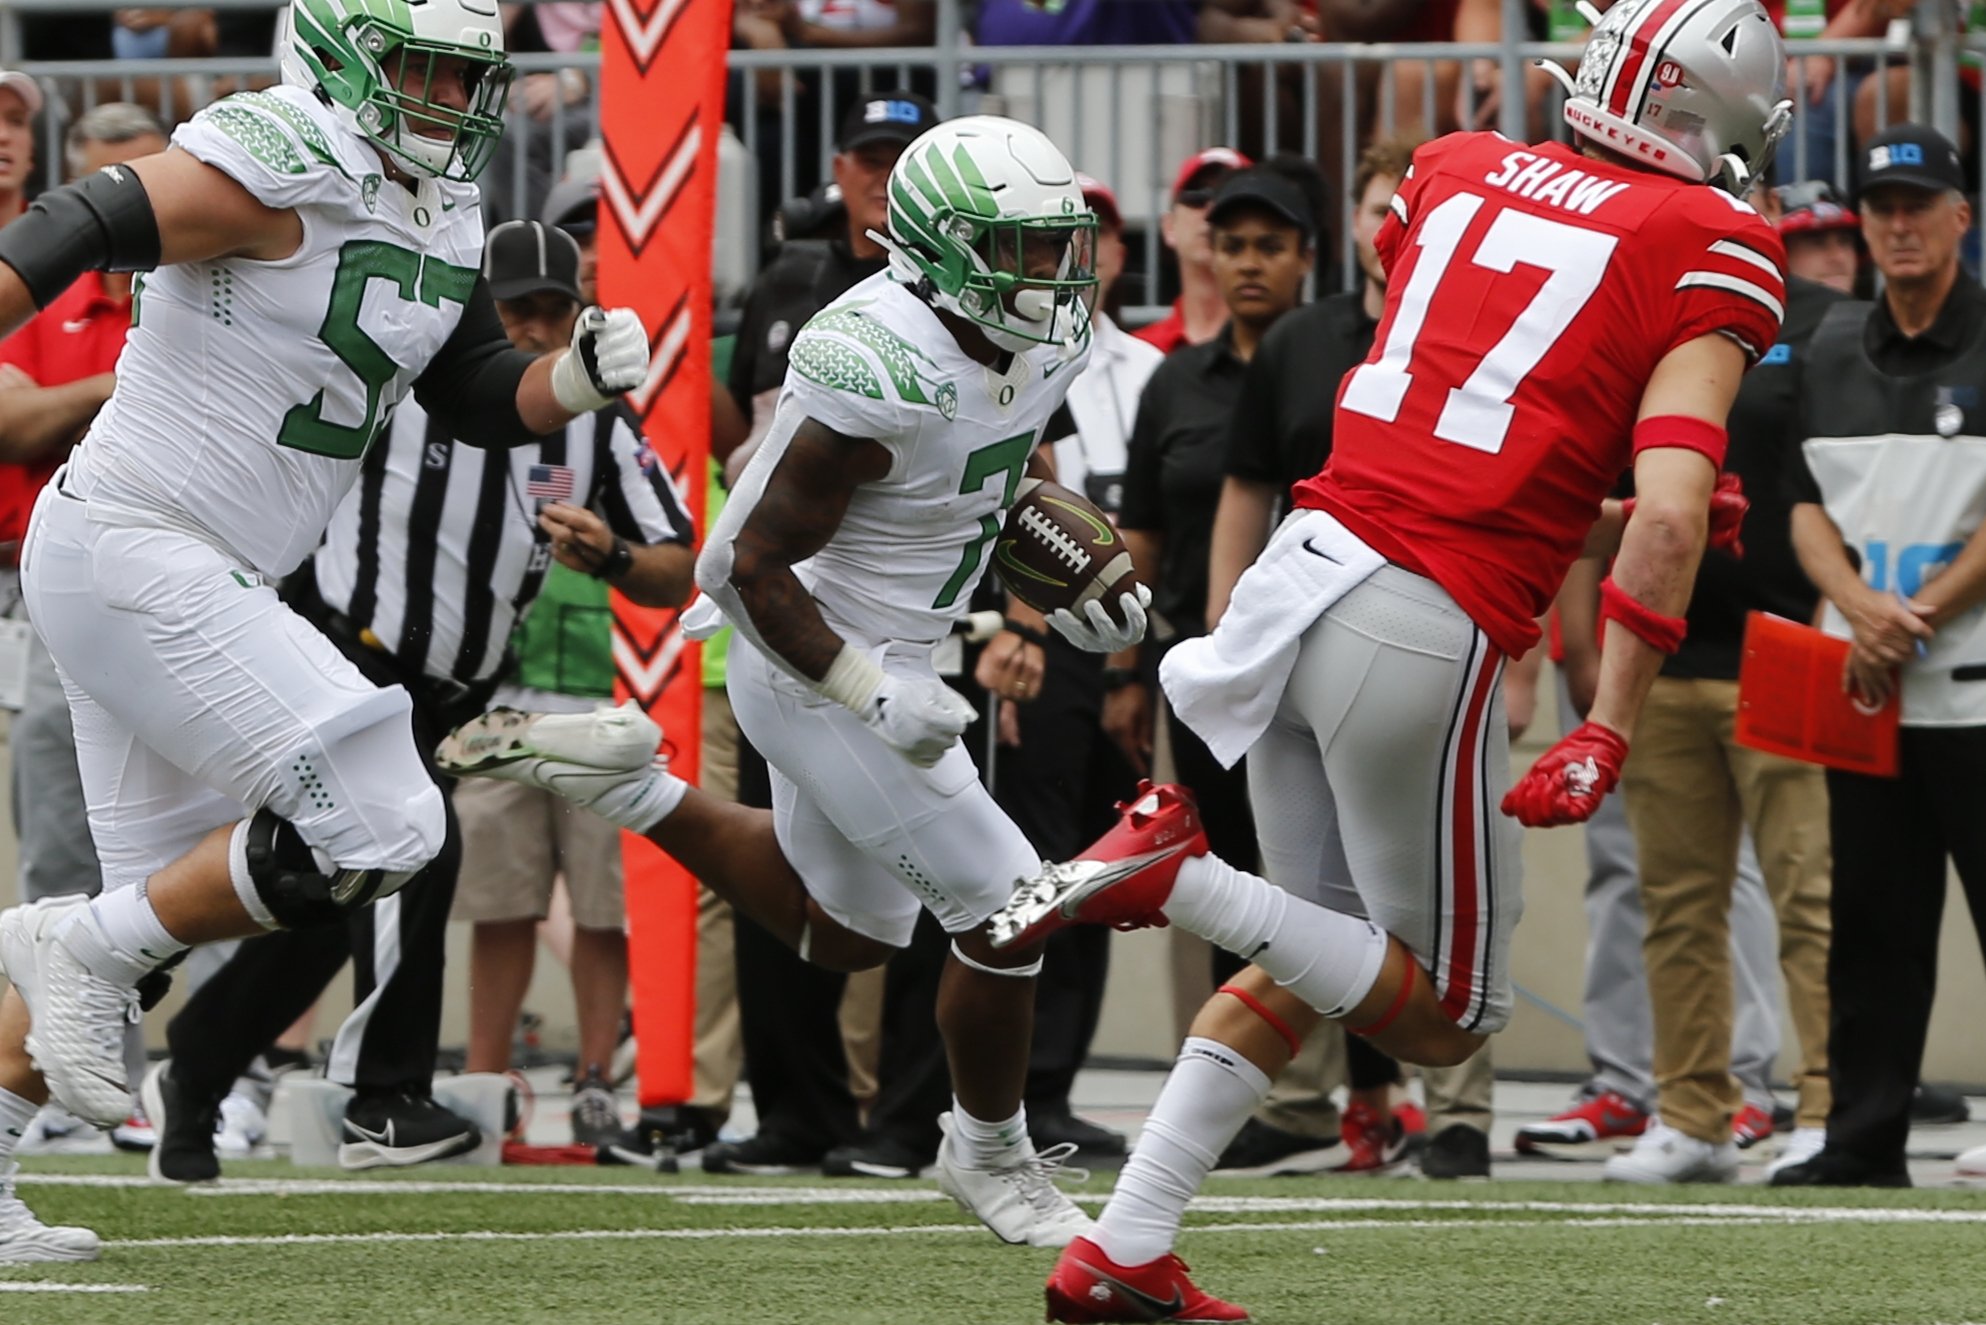 Oregon running back CJ Verdell, center, scores a touchdown against Ohio State during the first half of an NCAA college football game, Columbus, Ohio, U.S., Sept. 11, 2021. (AP Photo)